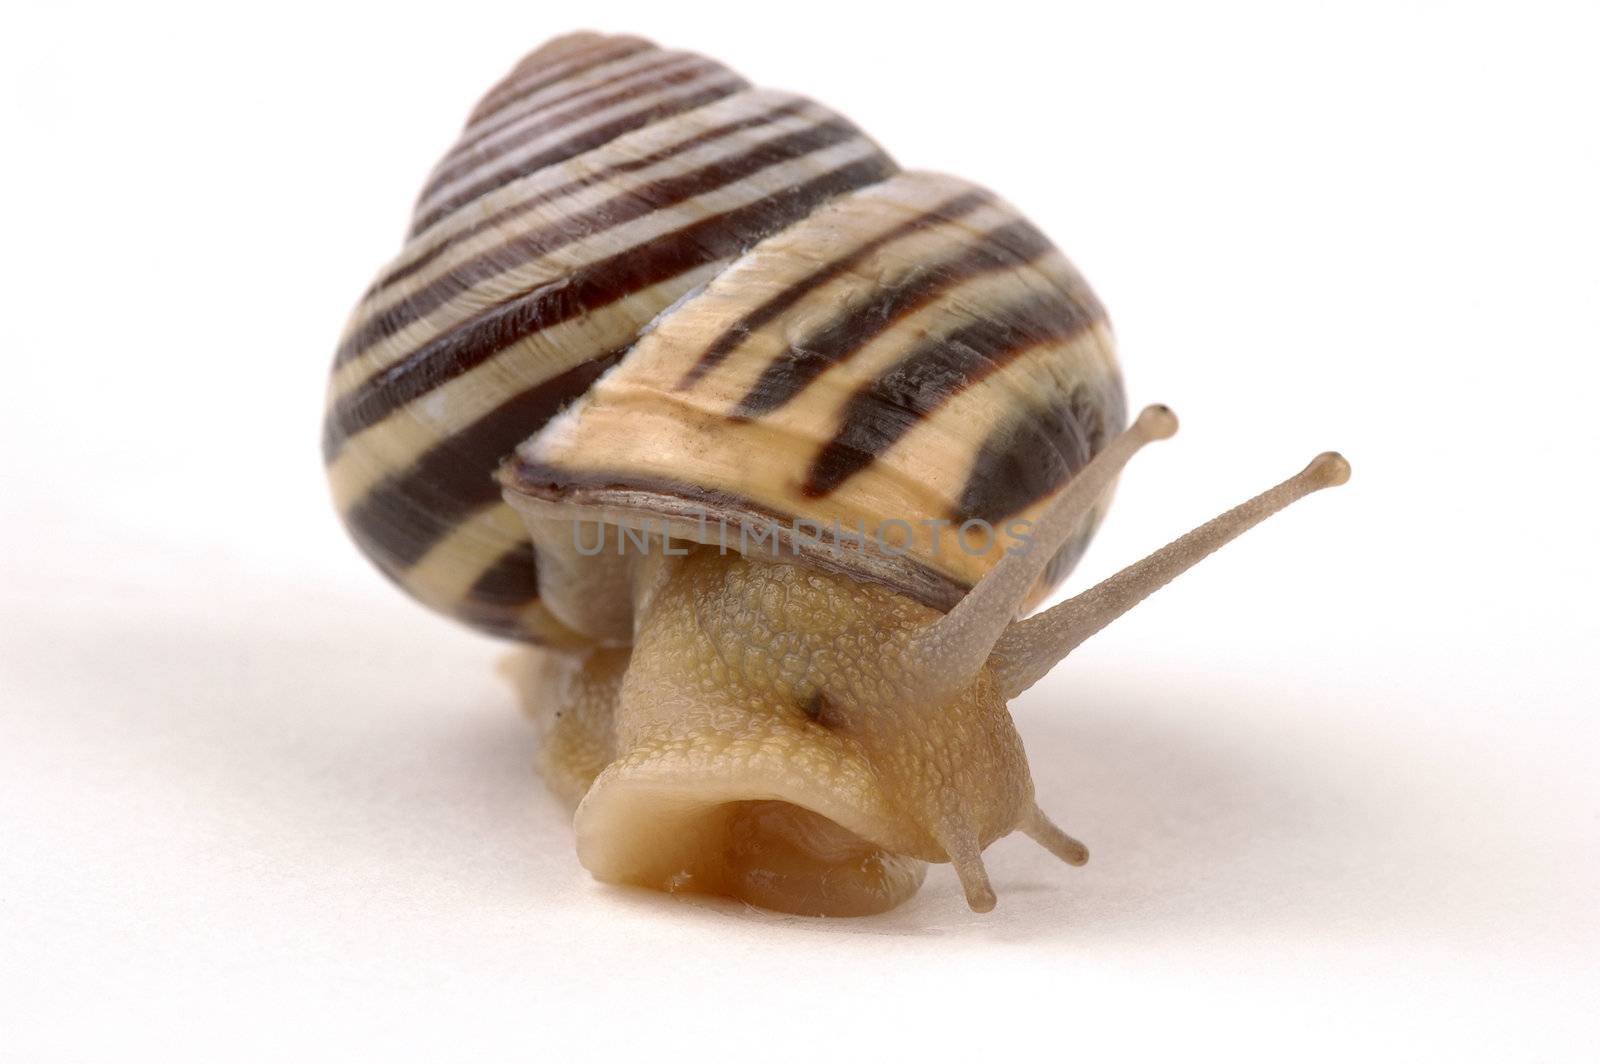 Close-up of a snail on a white background.